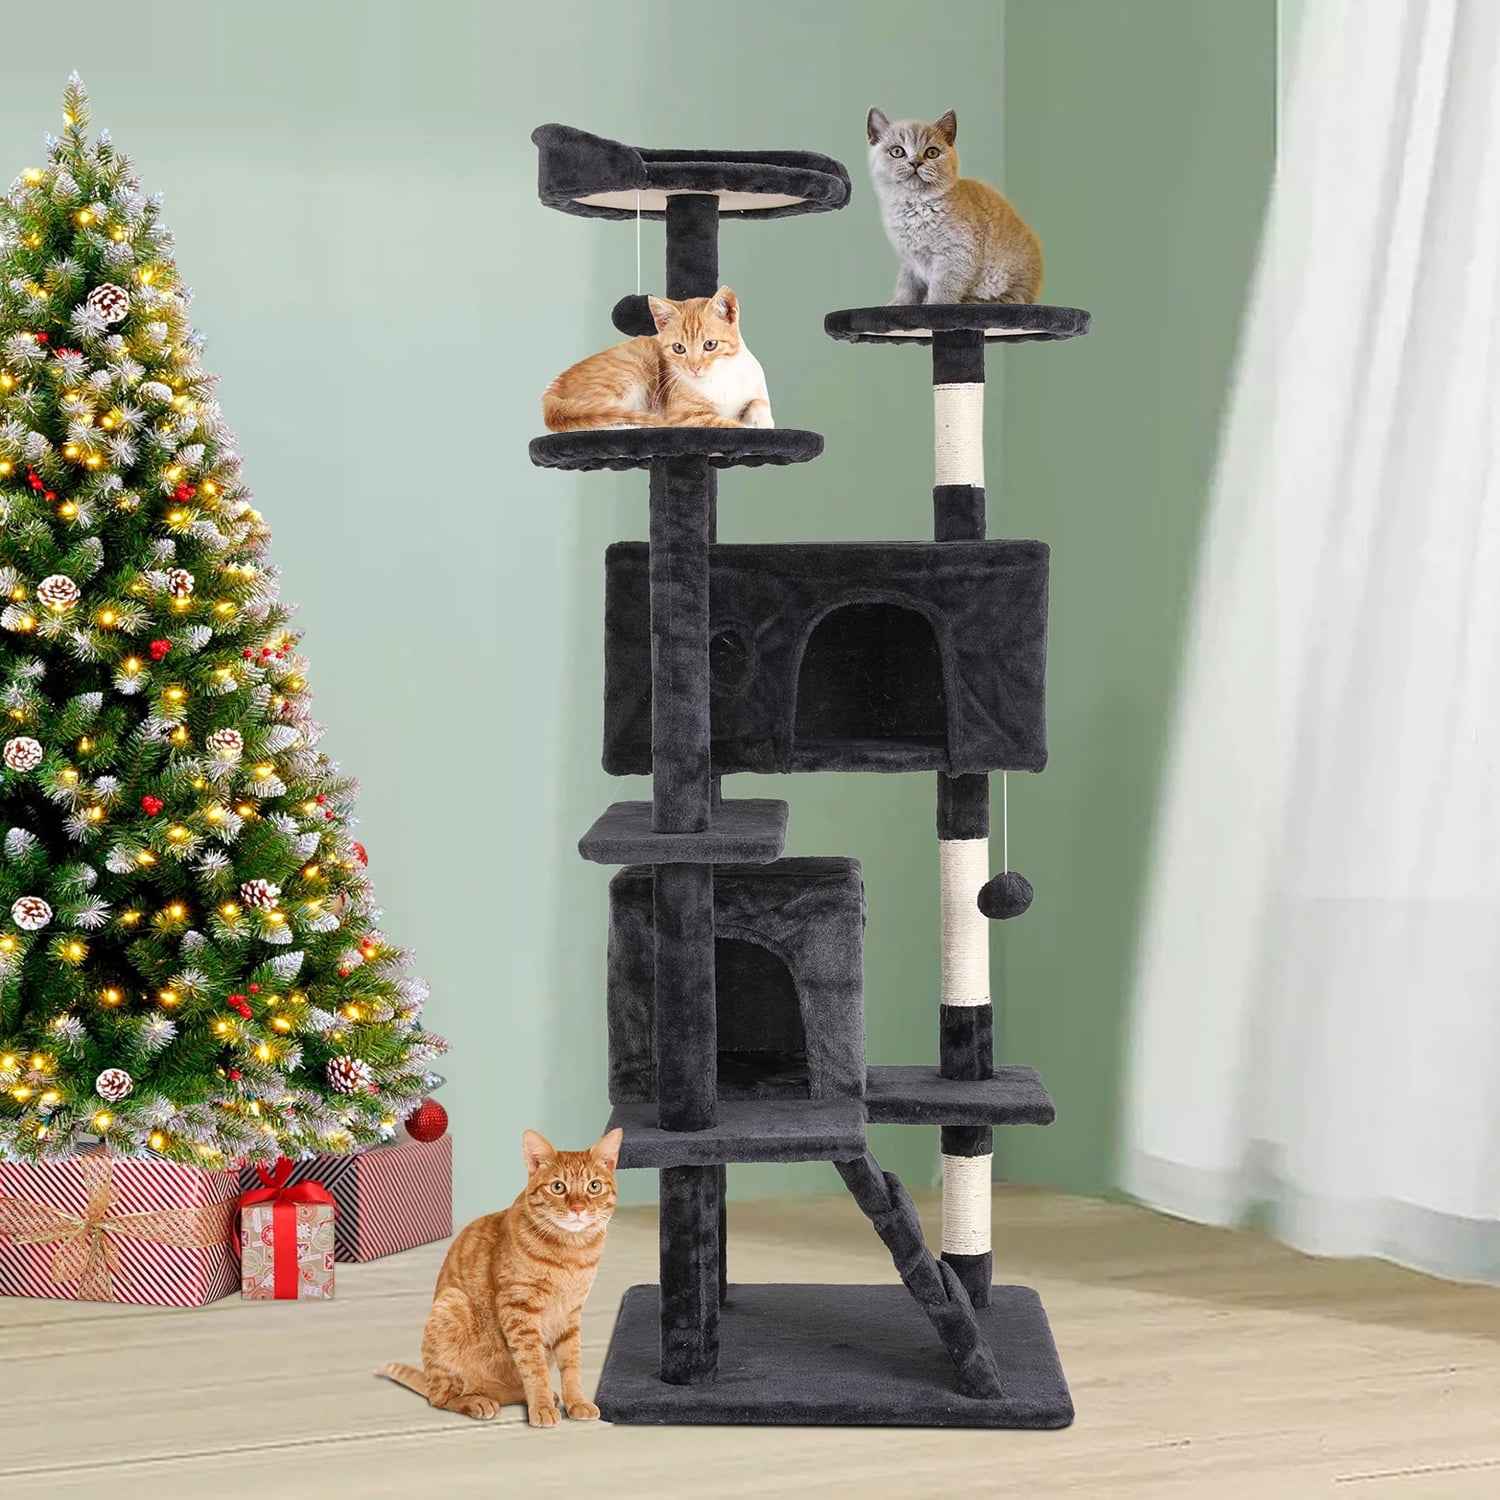 NiamVelo 54-in Double Condo Cat Tree Tower Playhouse with Scratching ...